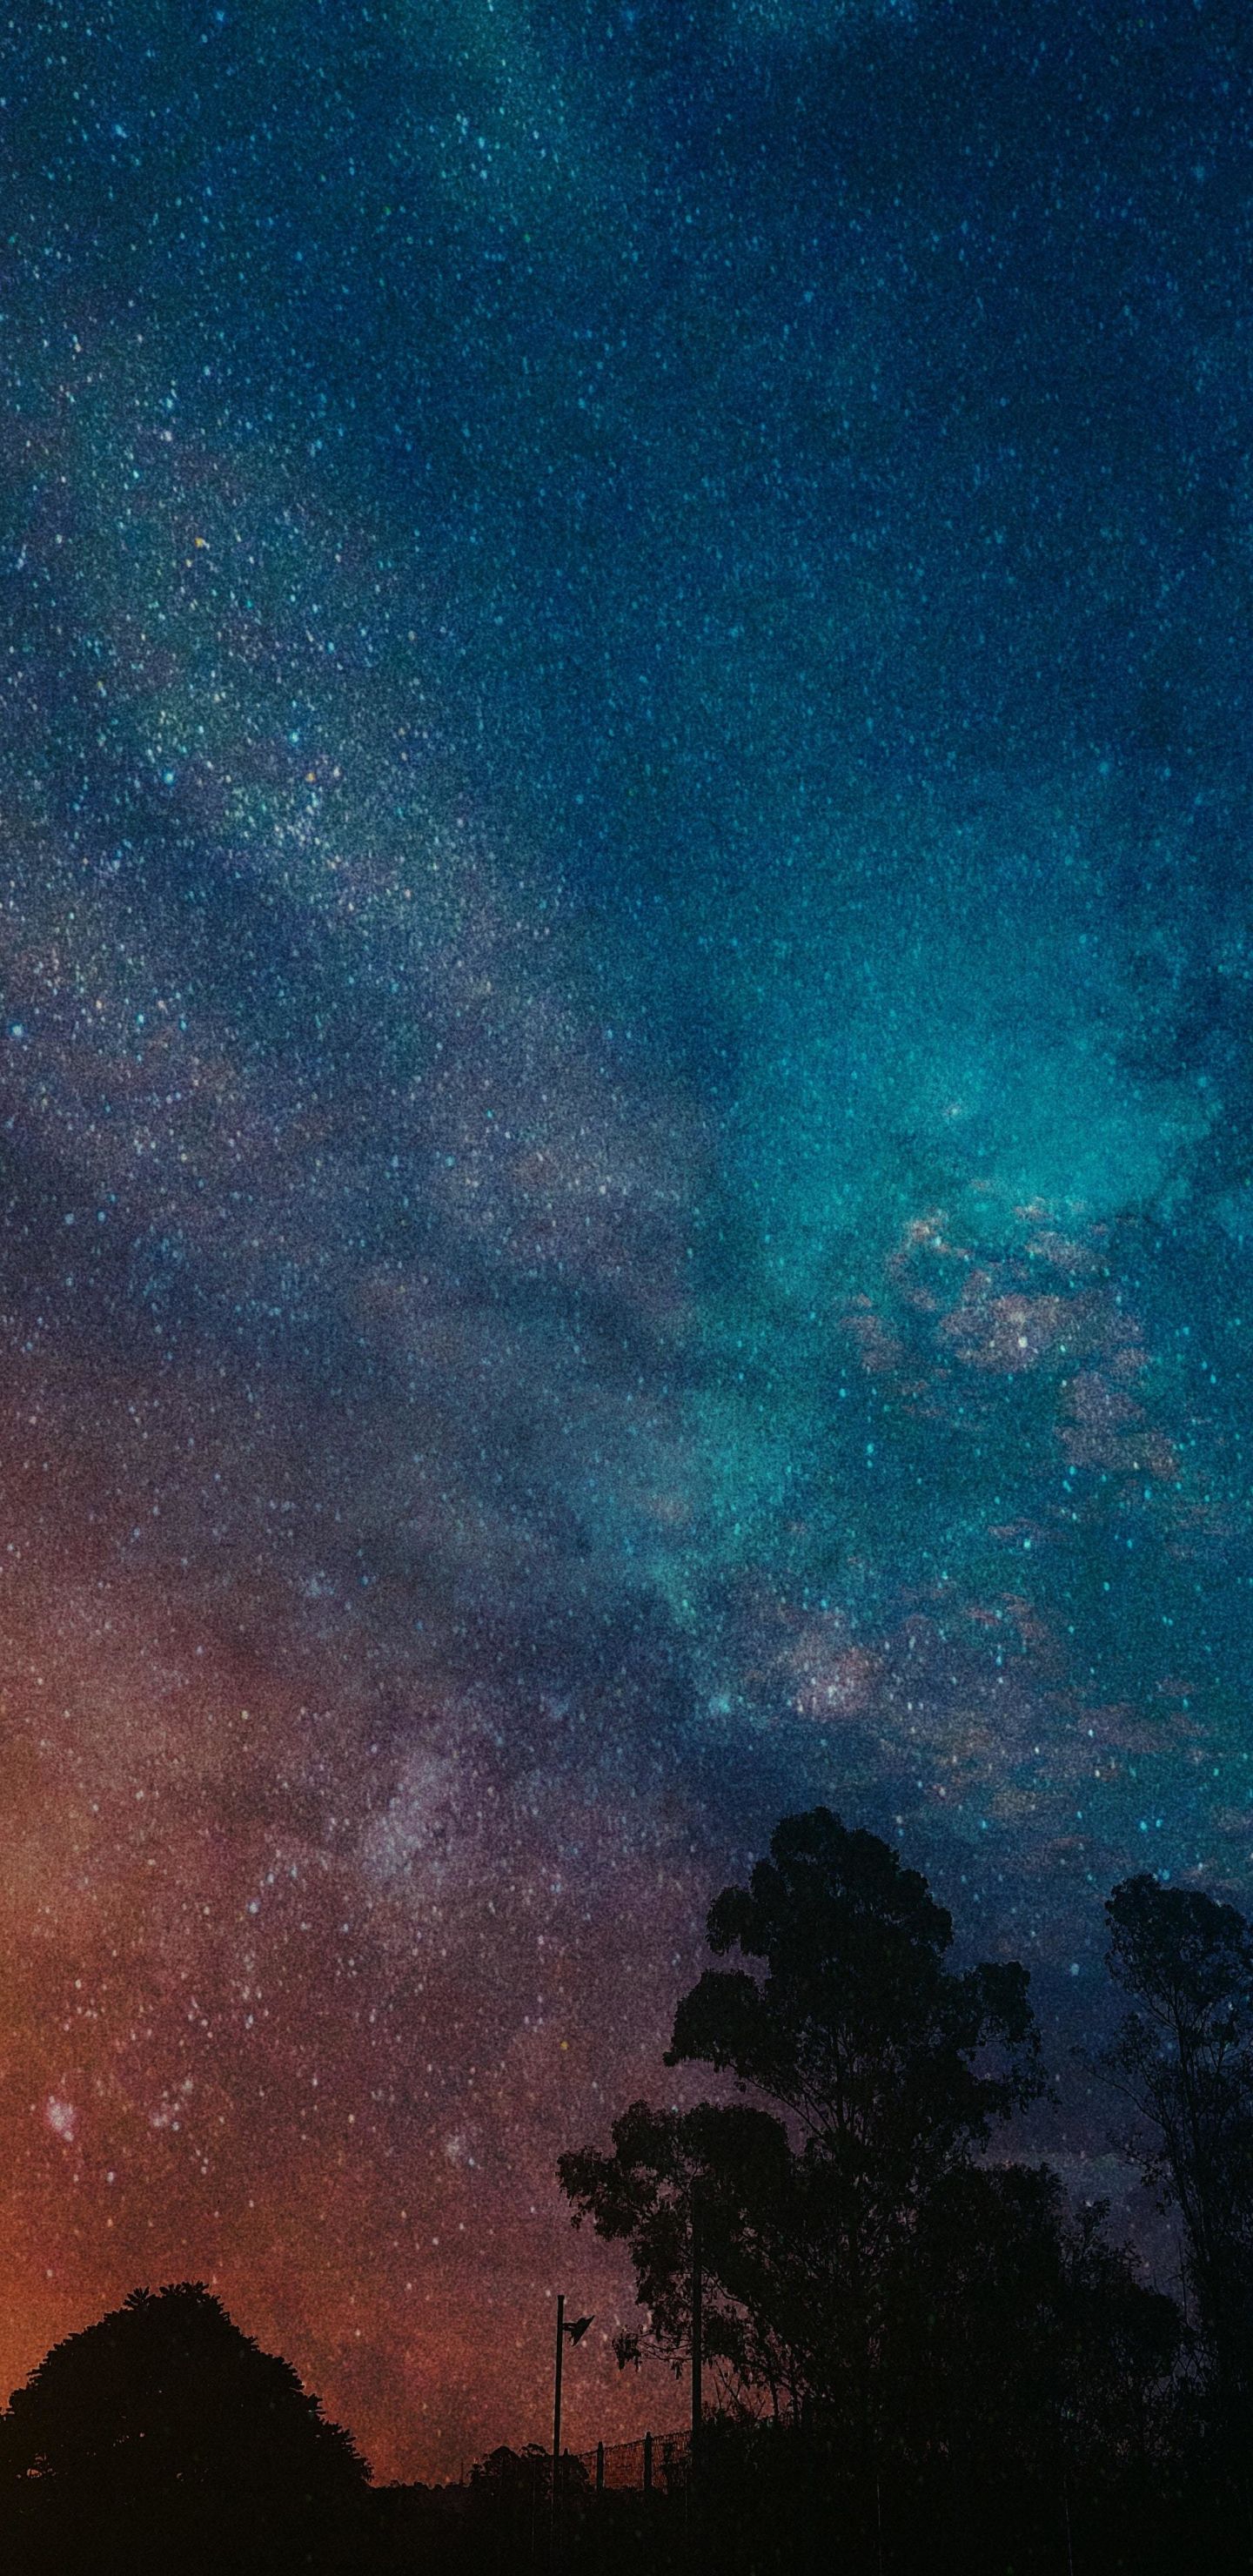 Download 1440x2960 wallpaper colorful sky, night, starry sky, samsung galaxy s samsung galaxy s8 plus, 1440x2960 HD image, background, 21619